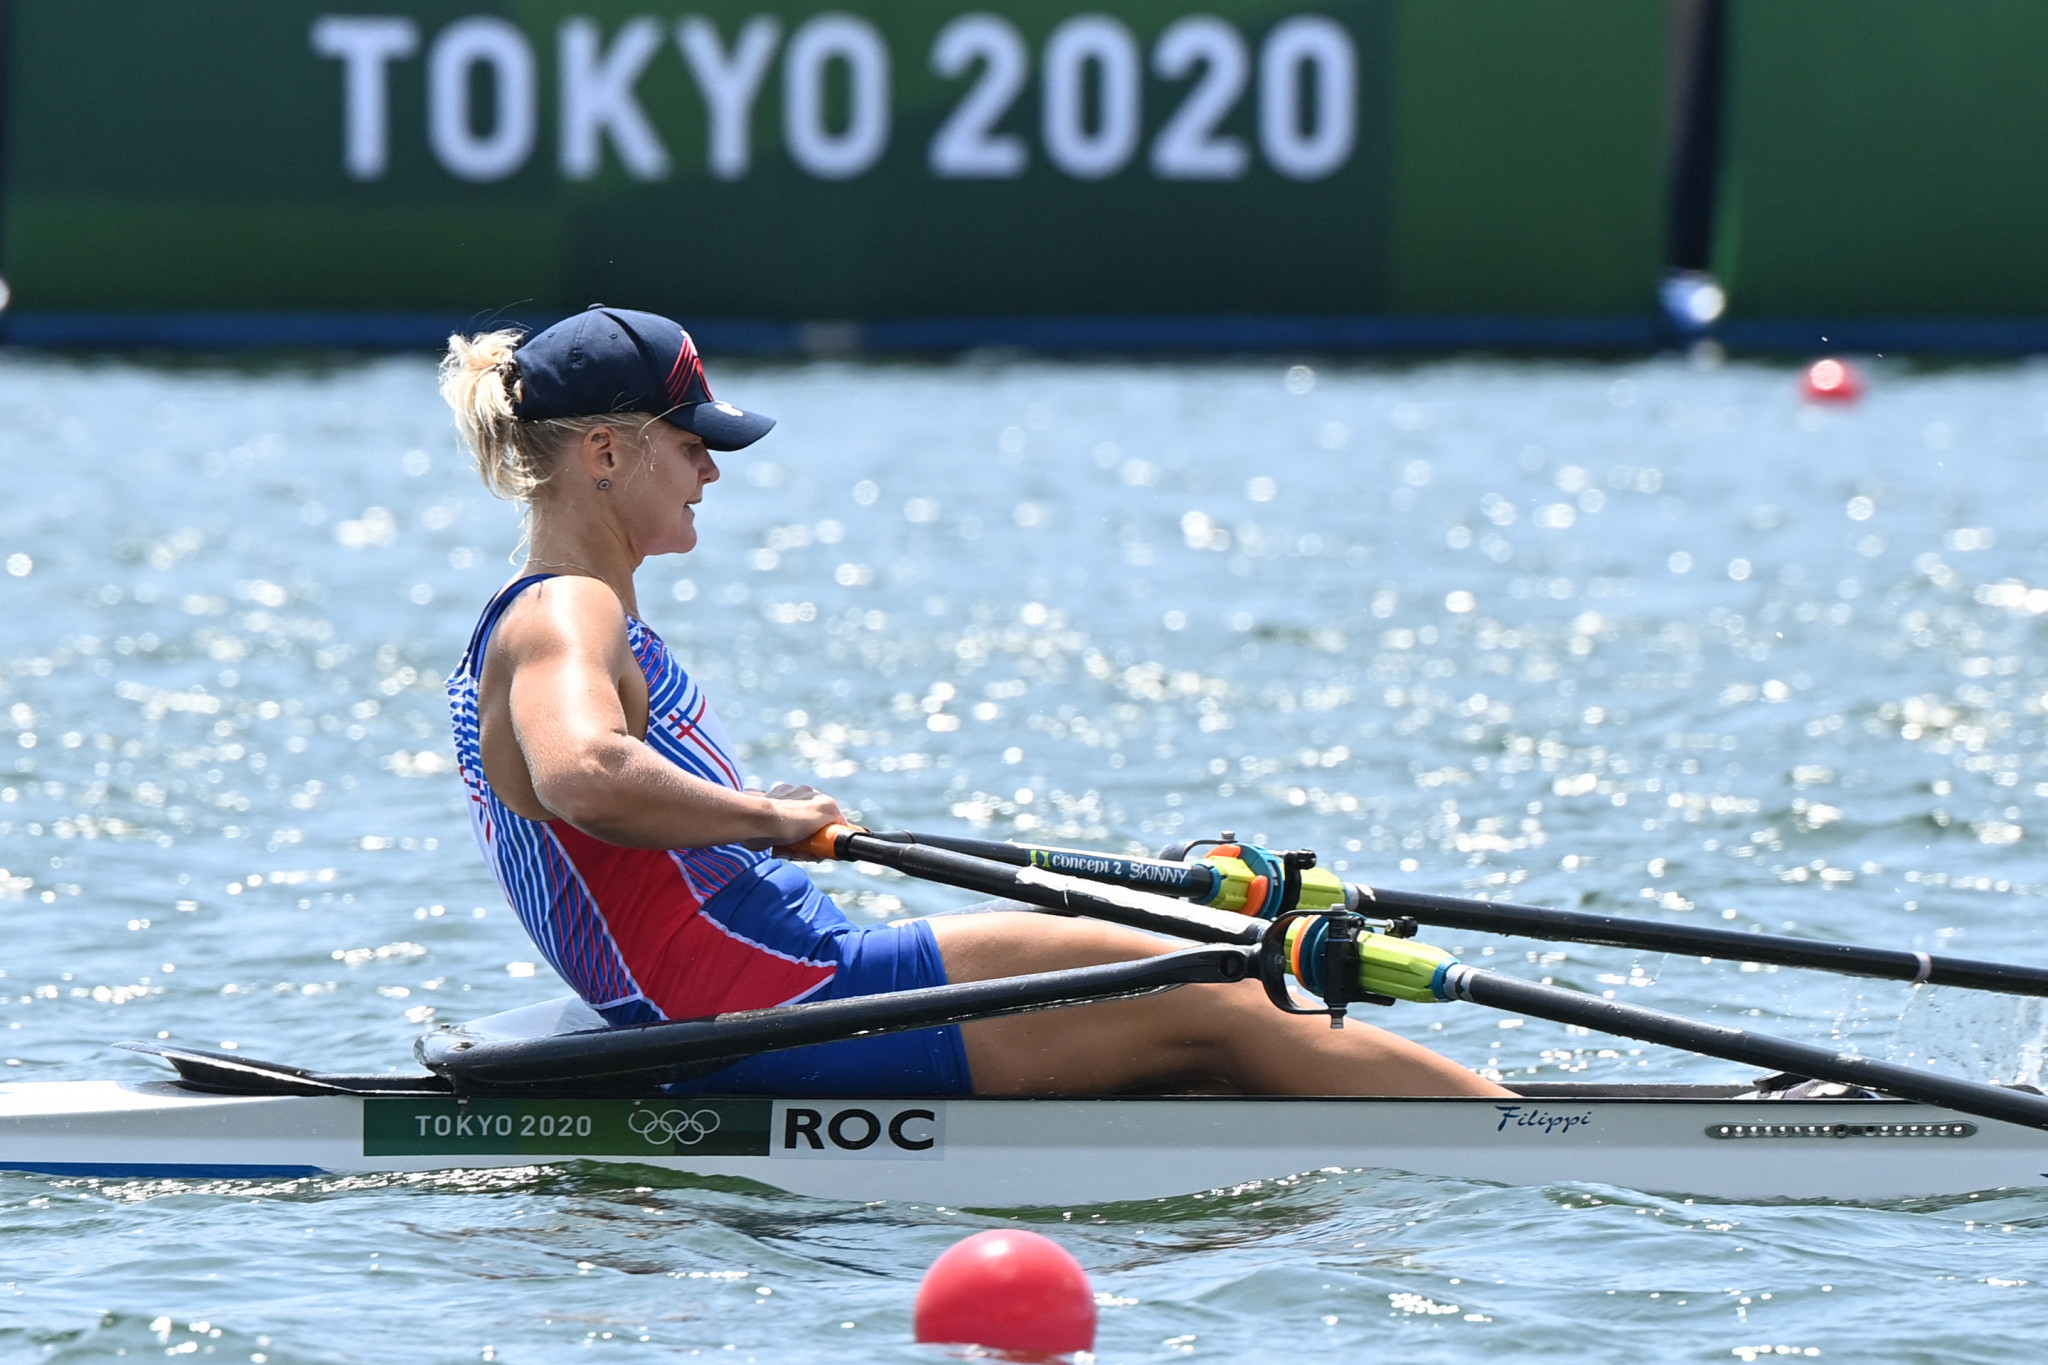 The Russian Olympic Committee won two rowing medals at Tokyo 2020, including silver for Hanna Prakhatsen in the women's single sculls ©Getty Images